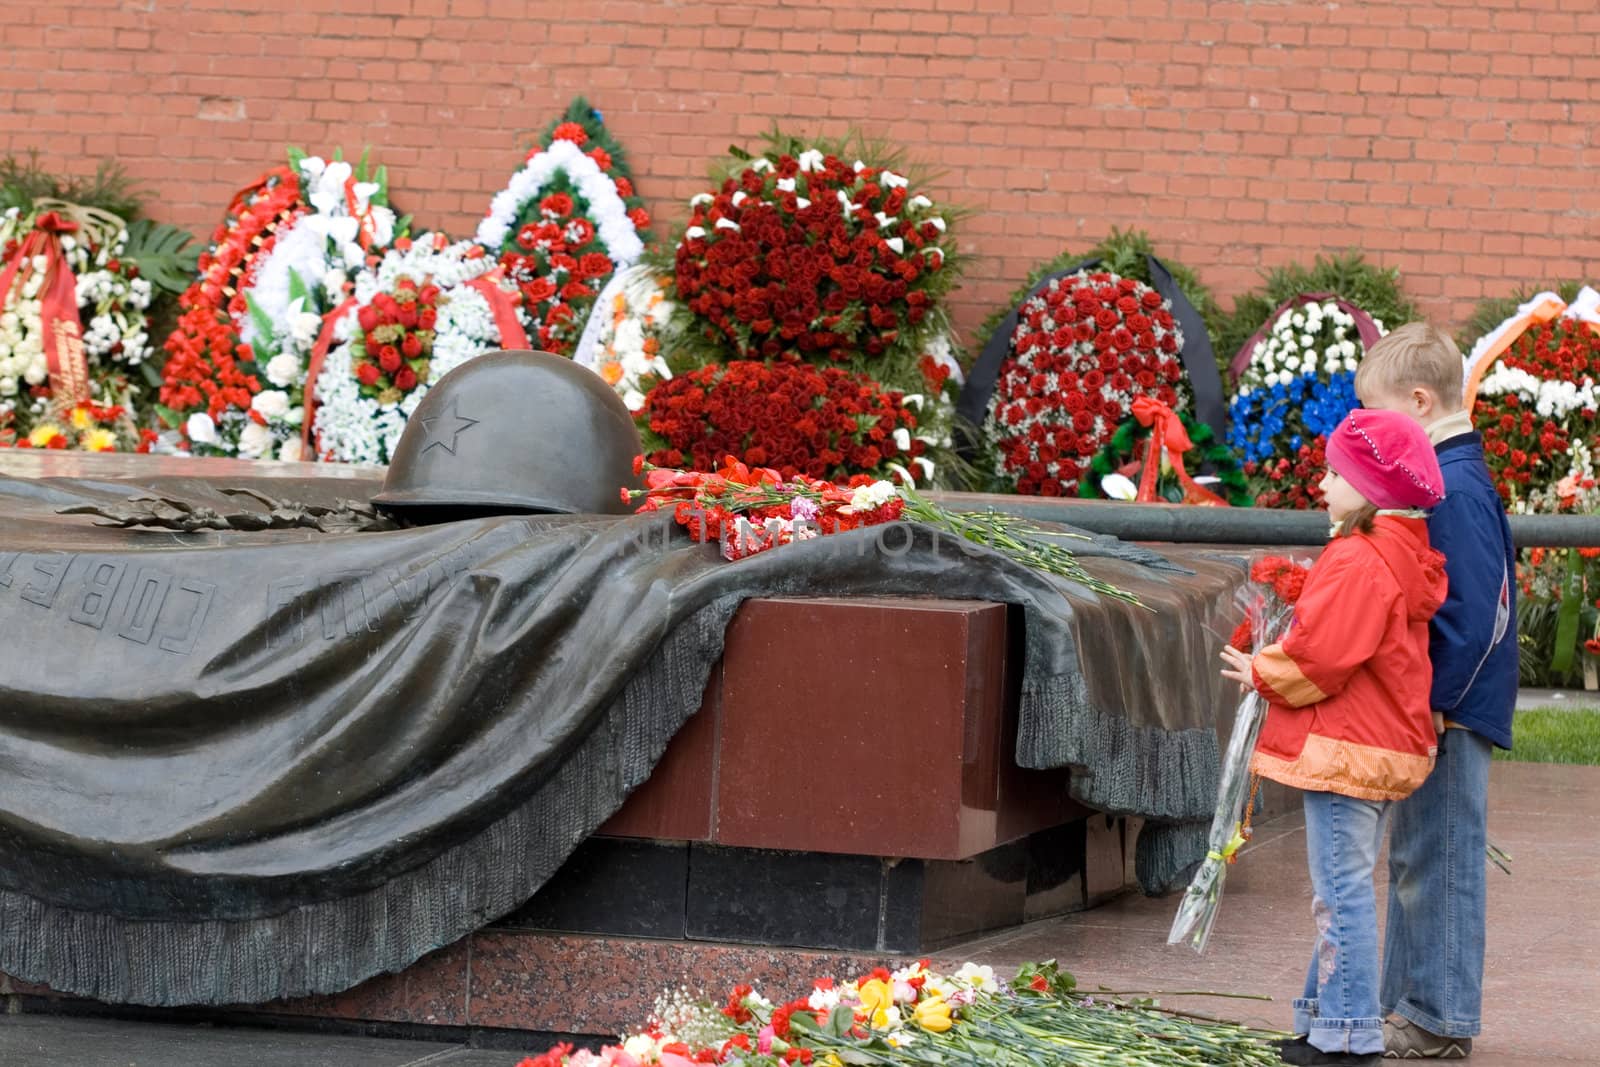 the celebration of Victory day in Russia